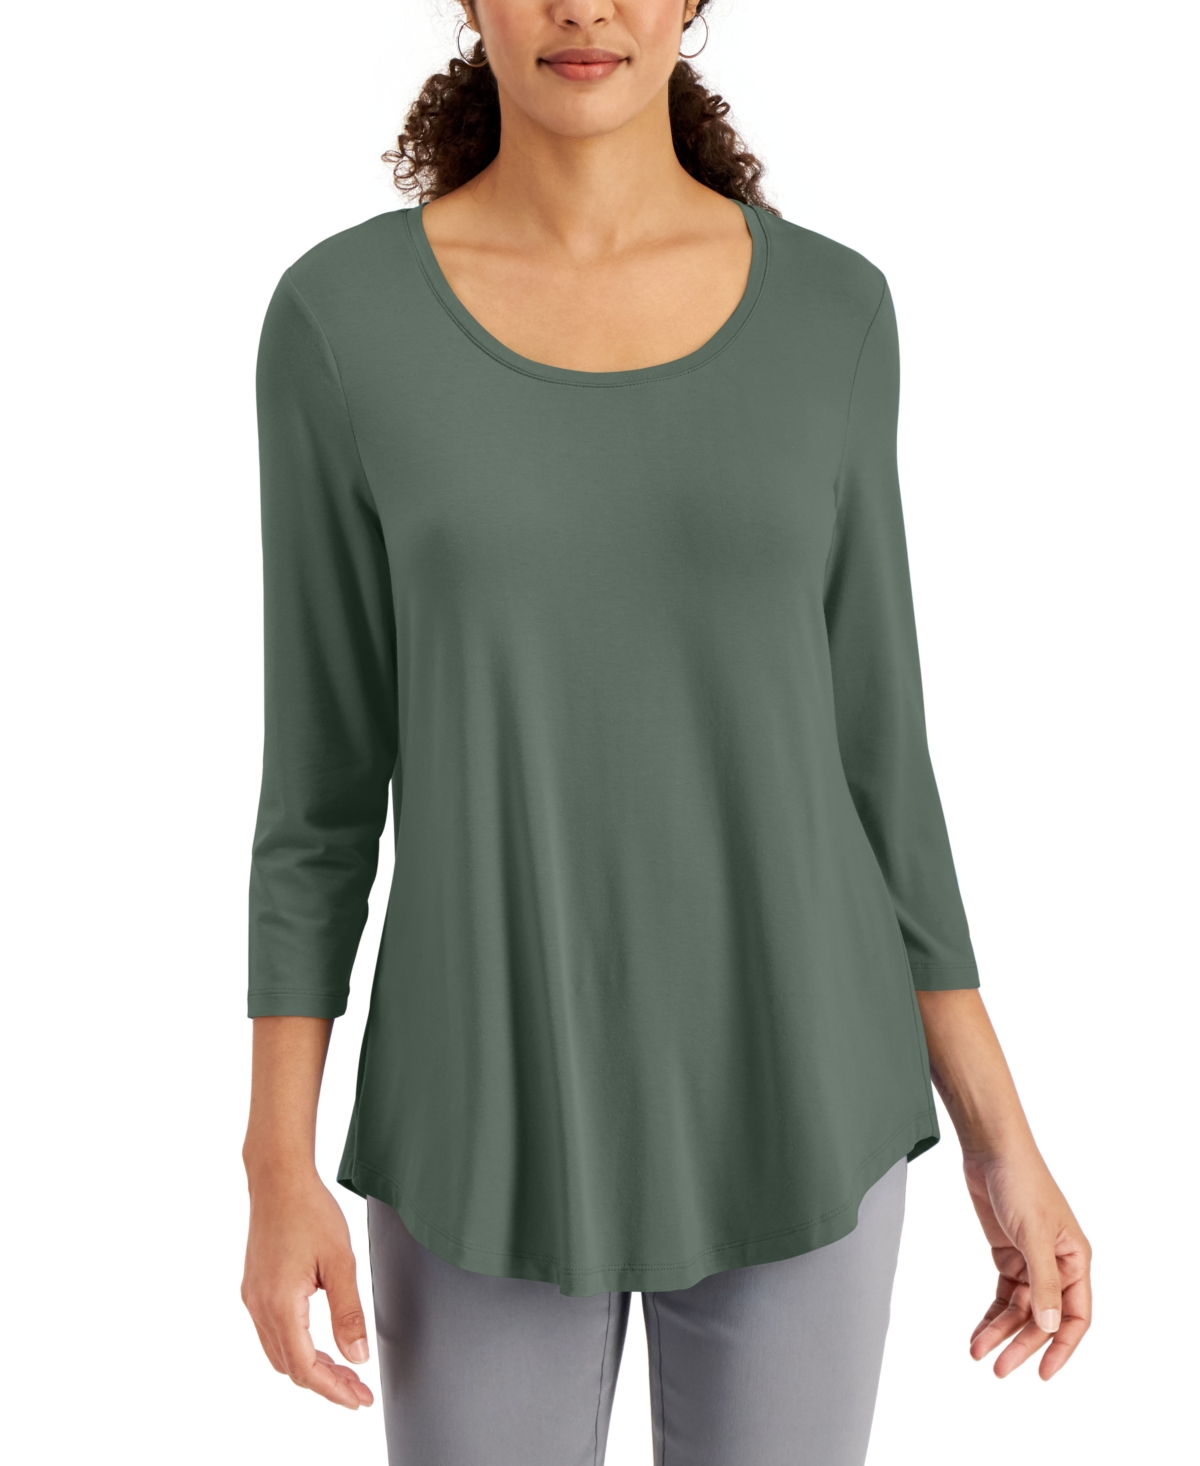 Jm Collection 3/4-Sleeve Solid Top, Created for Macy's